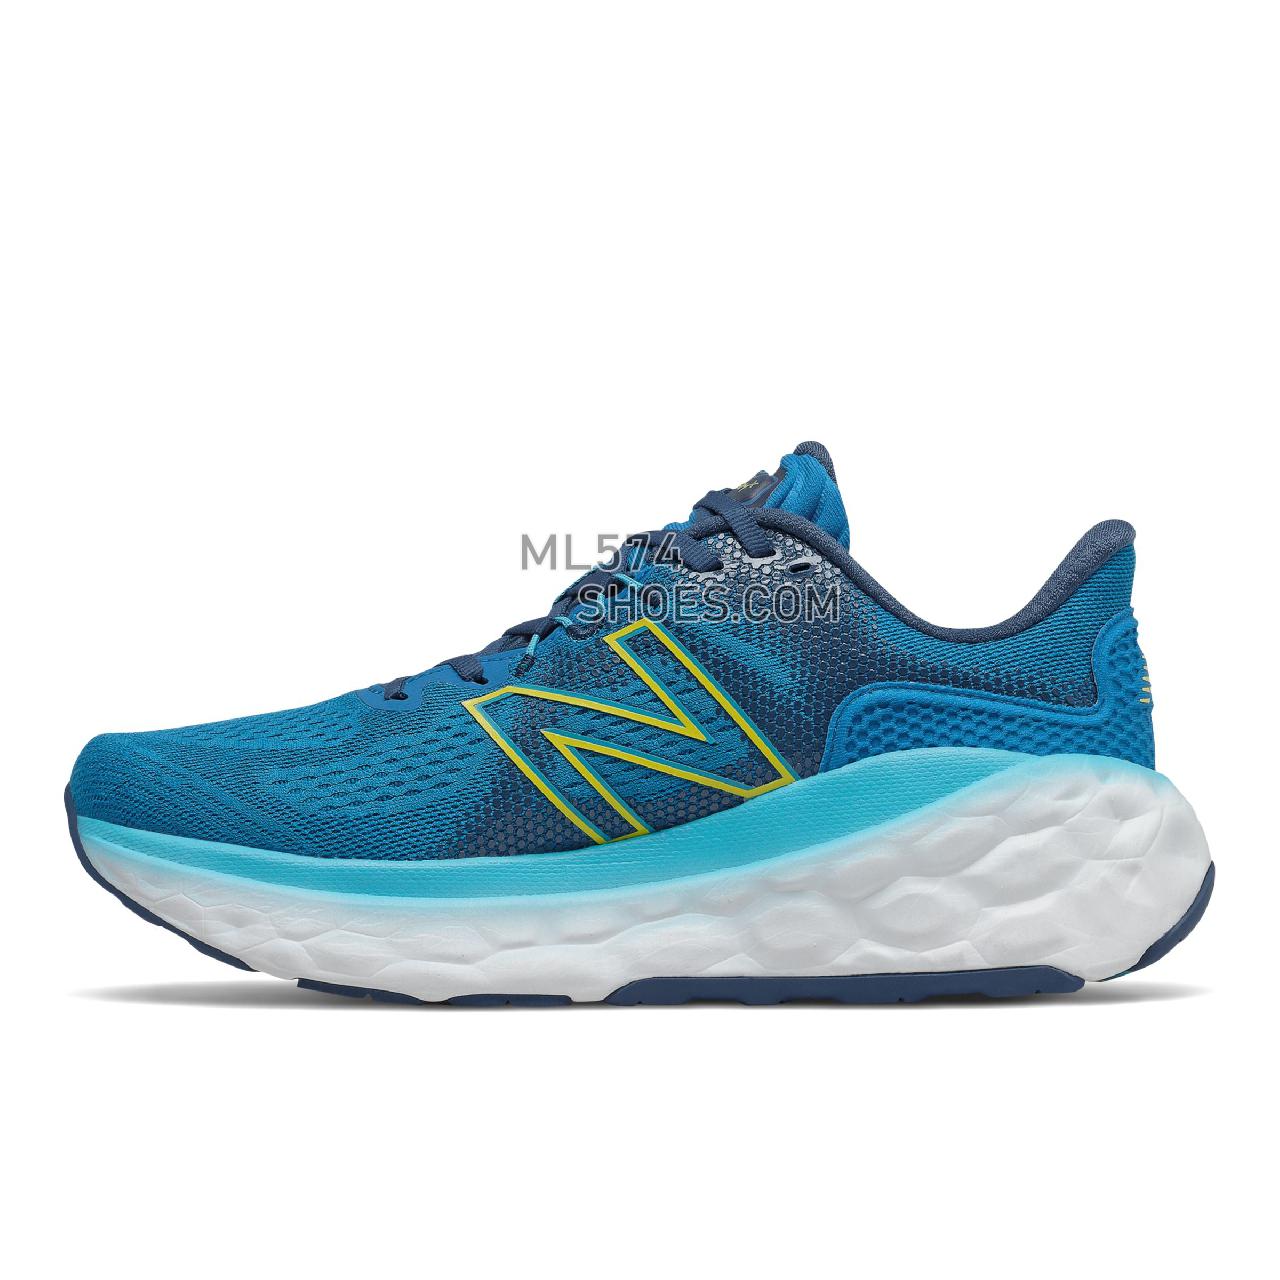 New Balance Fresh Foam More v3 - Men's Fresh Foam - Wave with Rogue Wave and First Light - MMORLV3